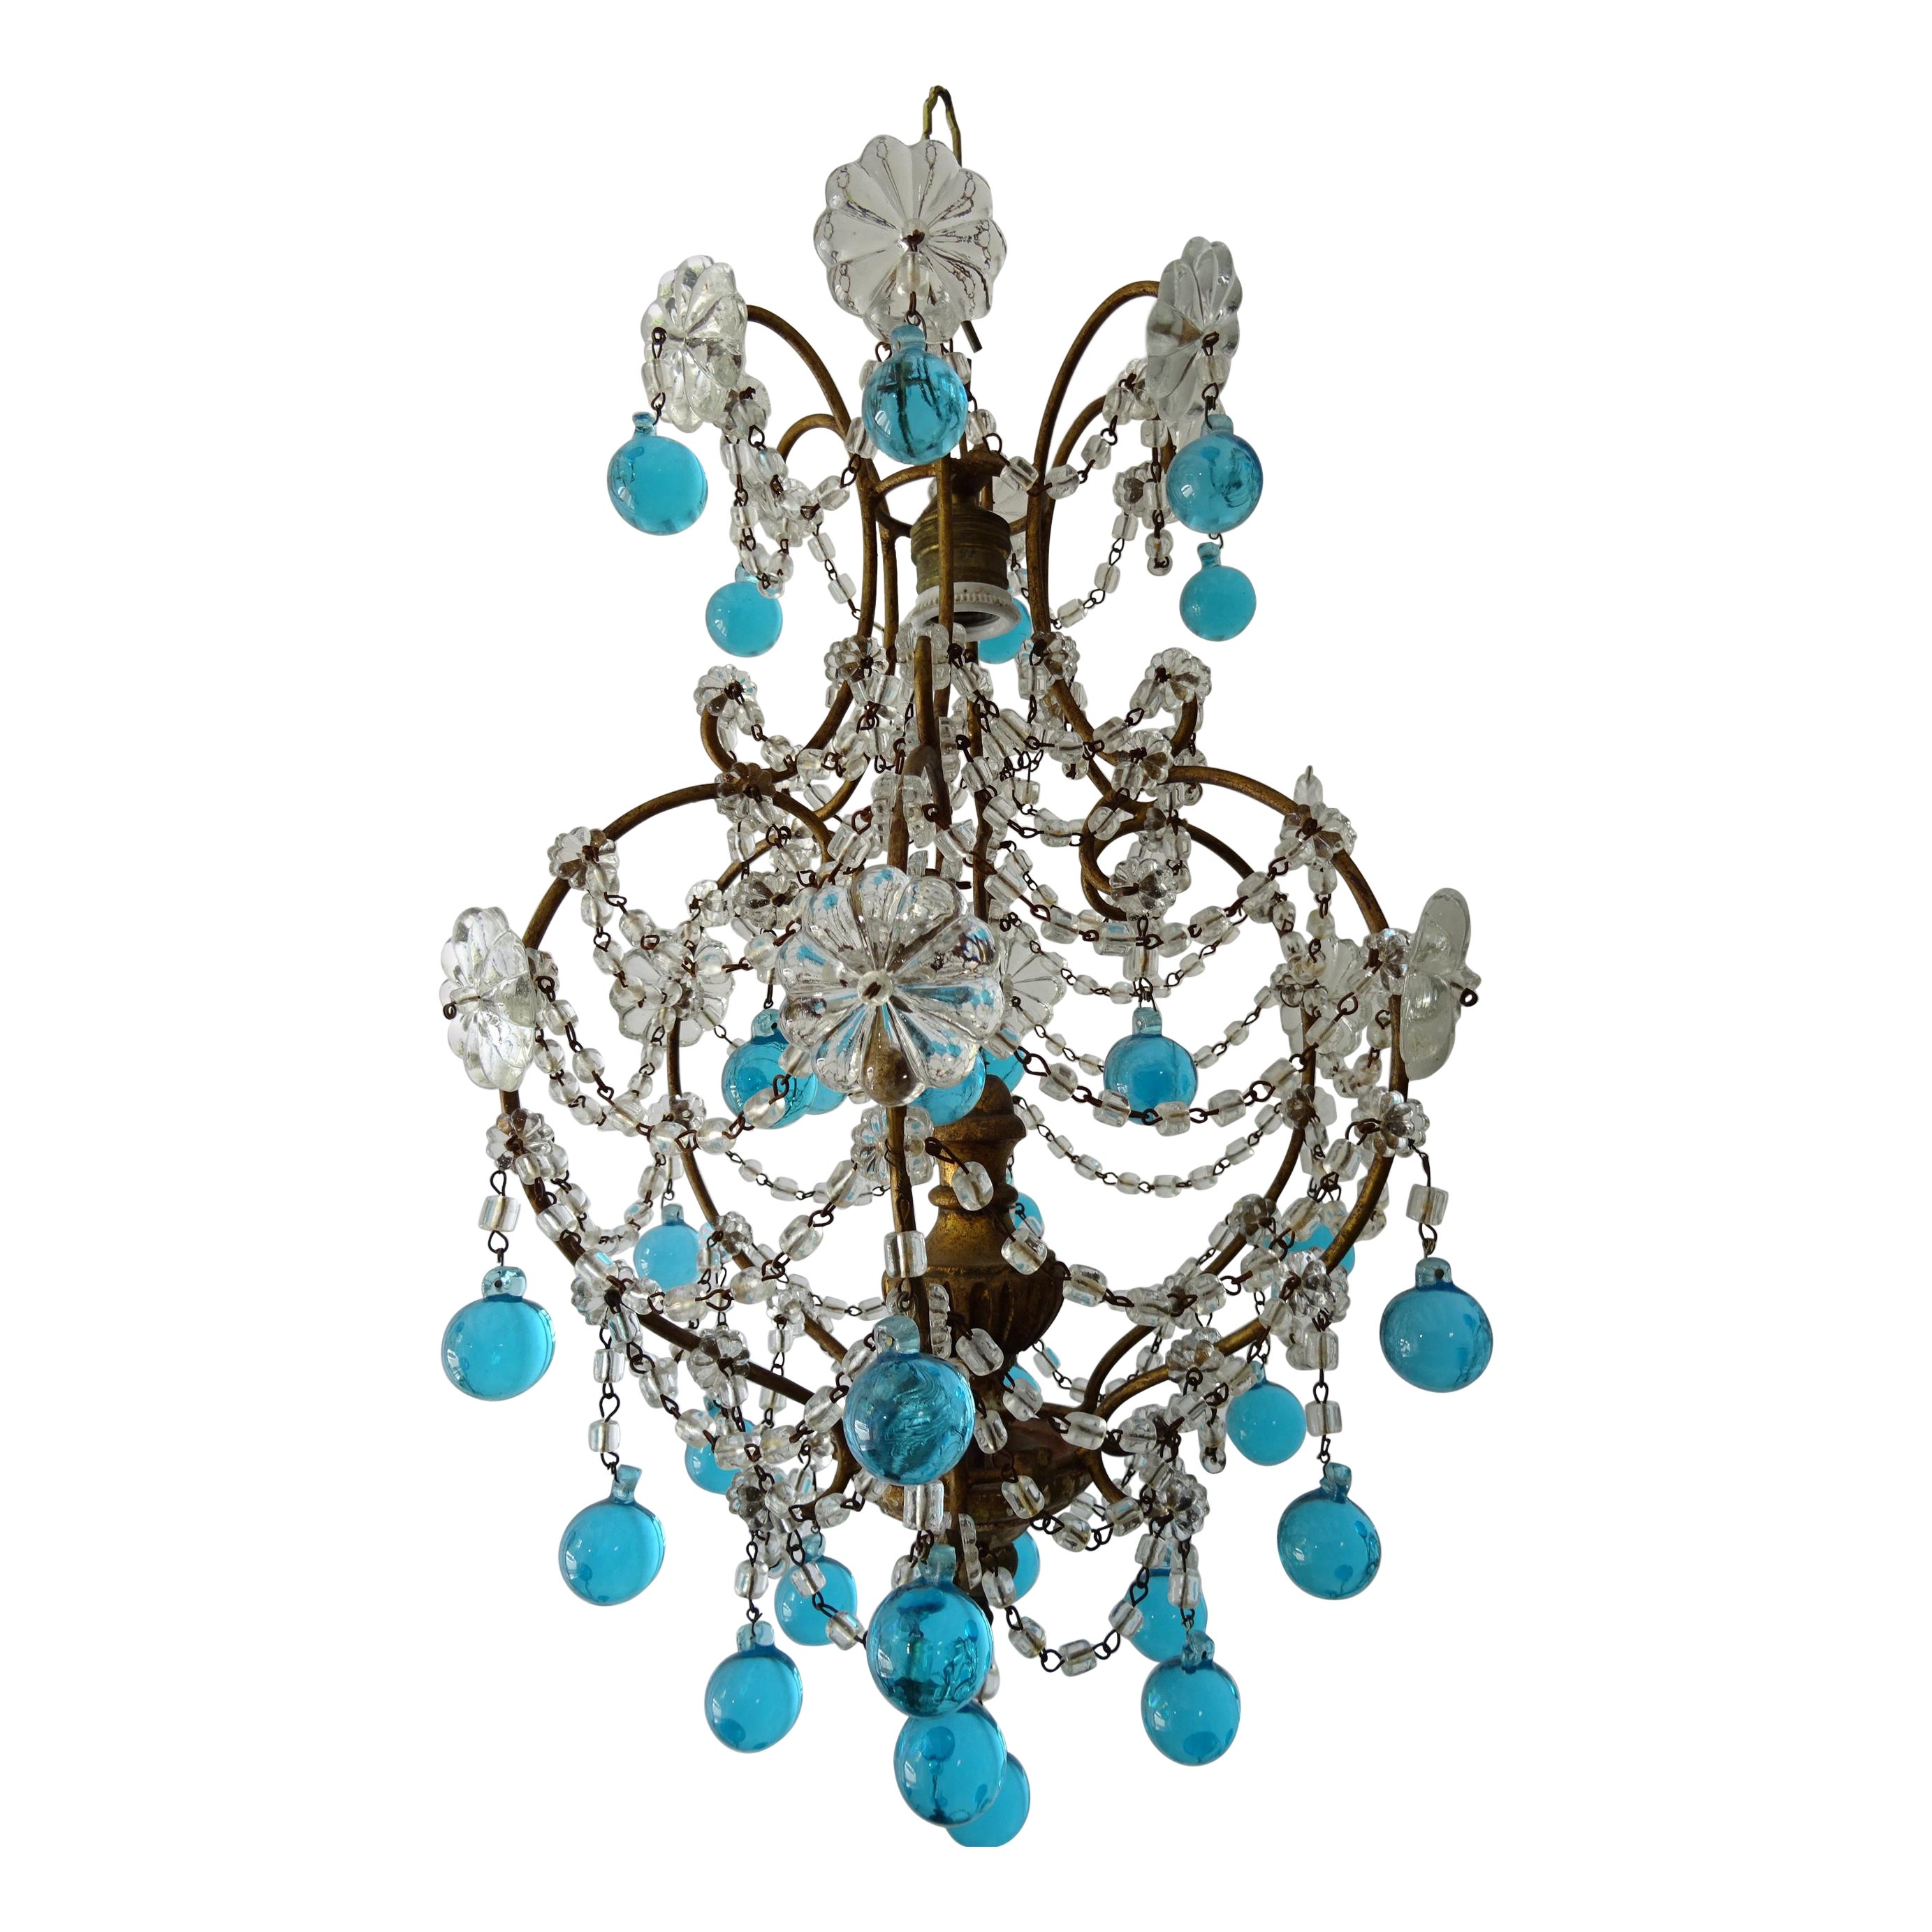 French Blue Murano Drops Crystal Prisms Chandelier, circa 1920